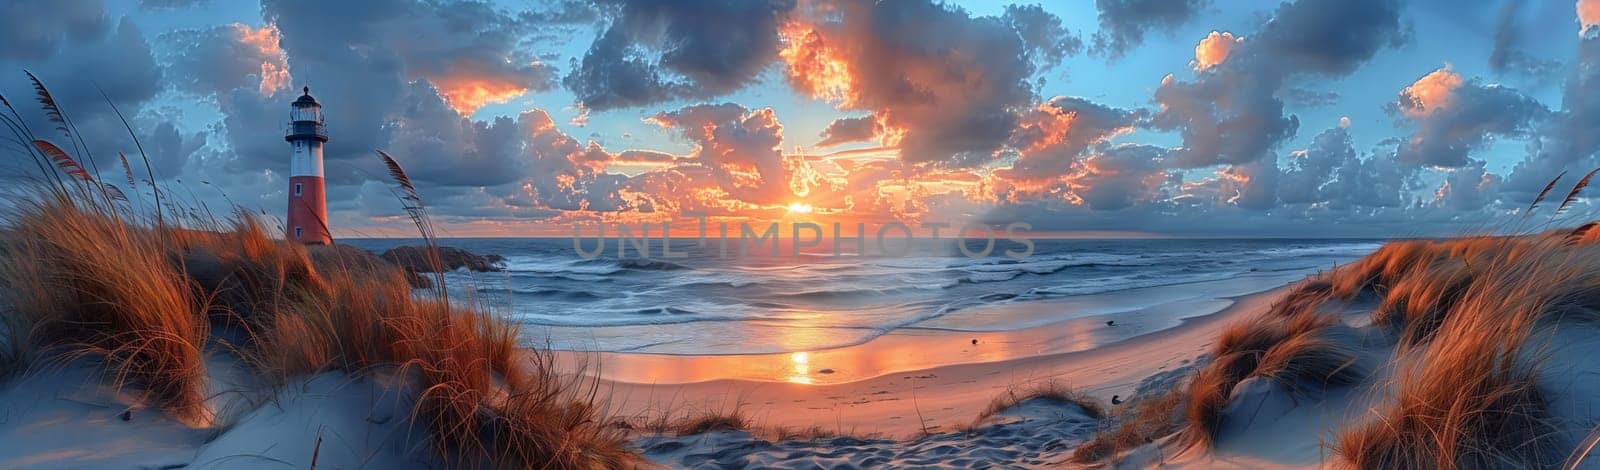 a painting of a sunset over the ocean with a lighthouse in the distance by richwolf